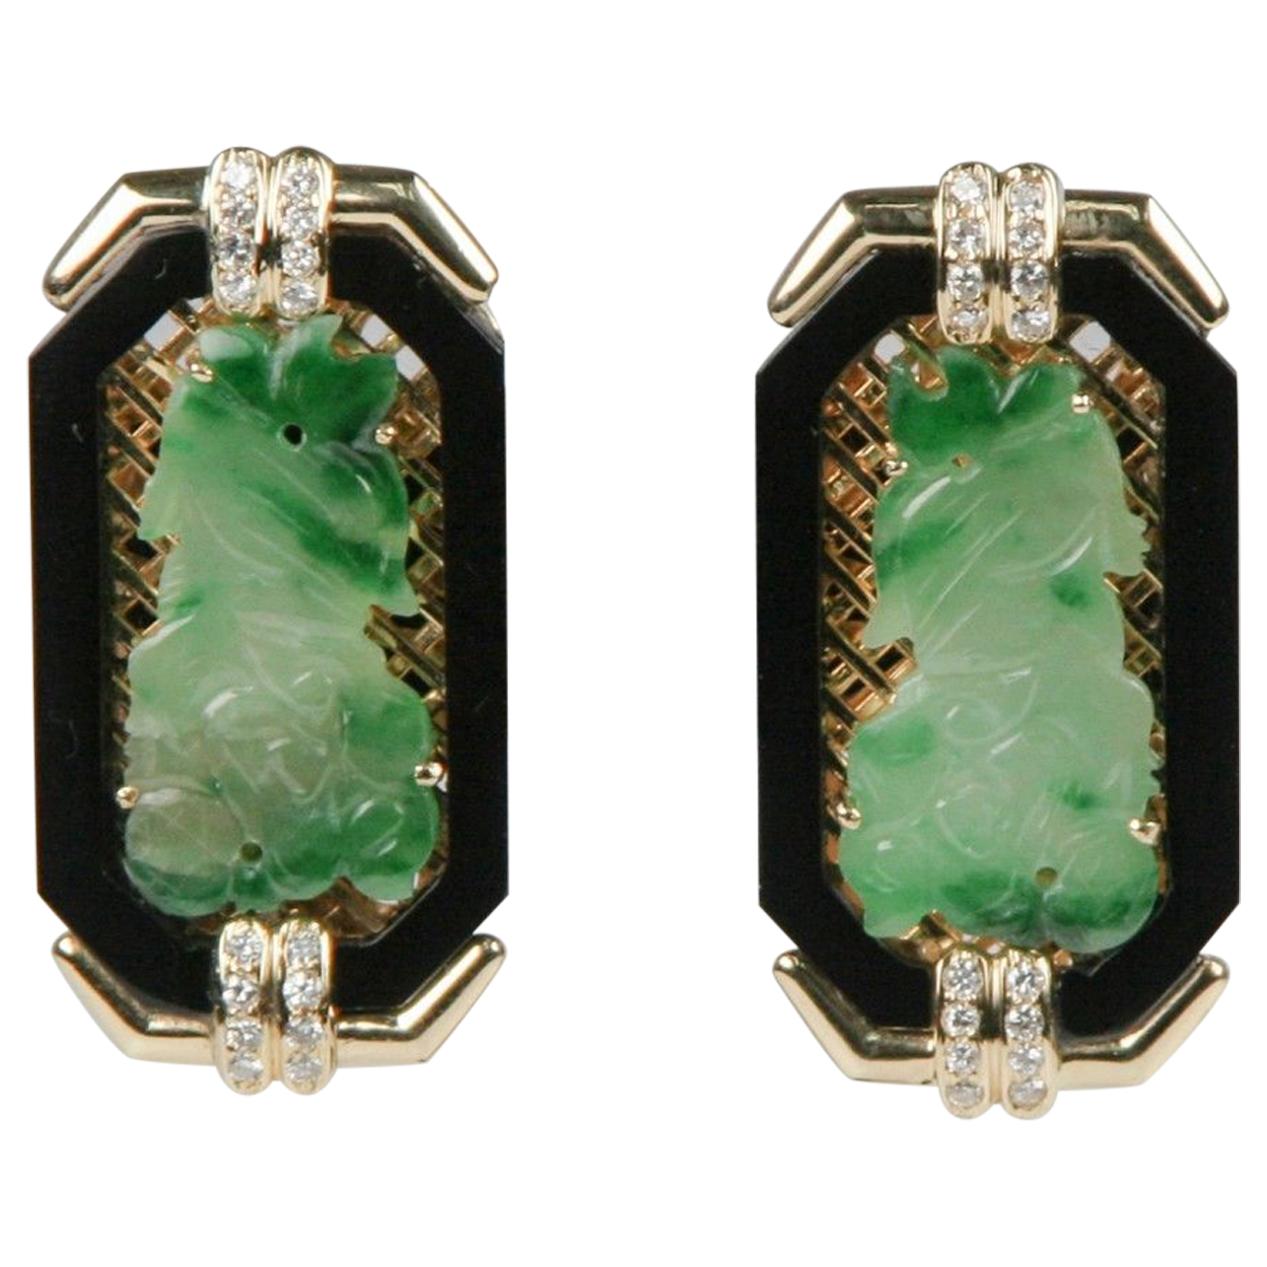 Imperial Jade with Onyx Border and Diamond Accents 18 Karat Yellow Gold Earrings